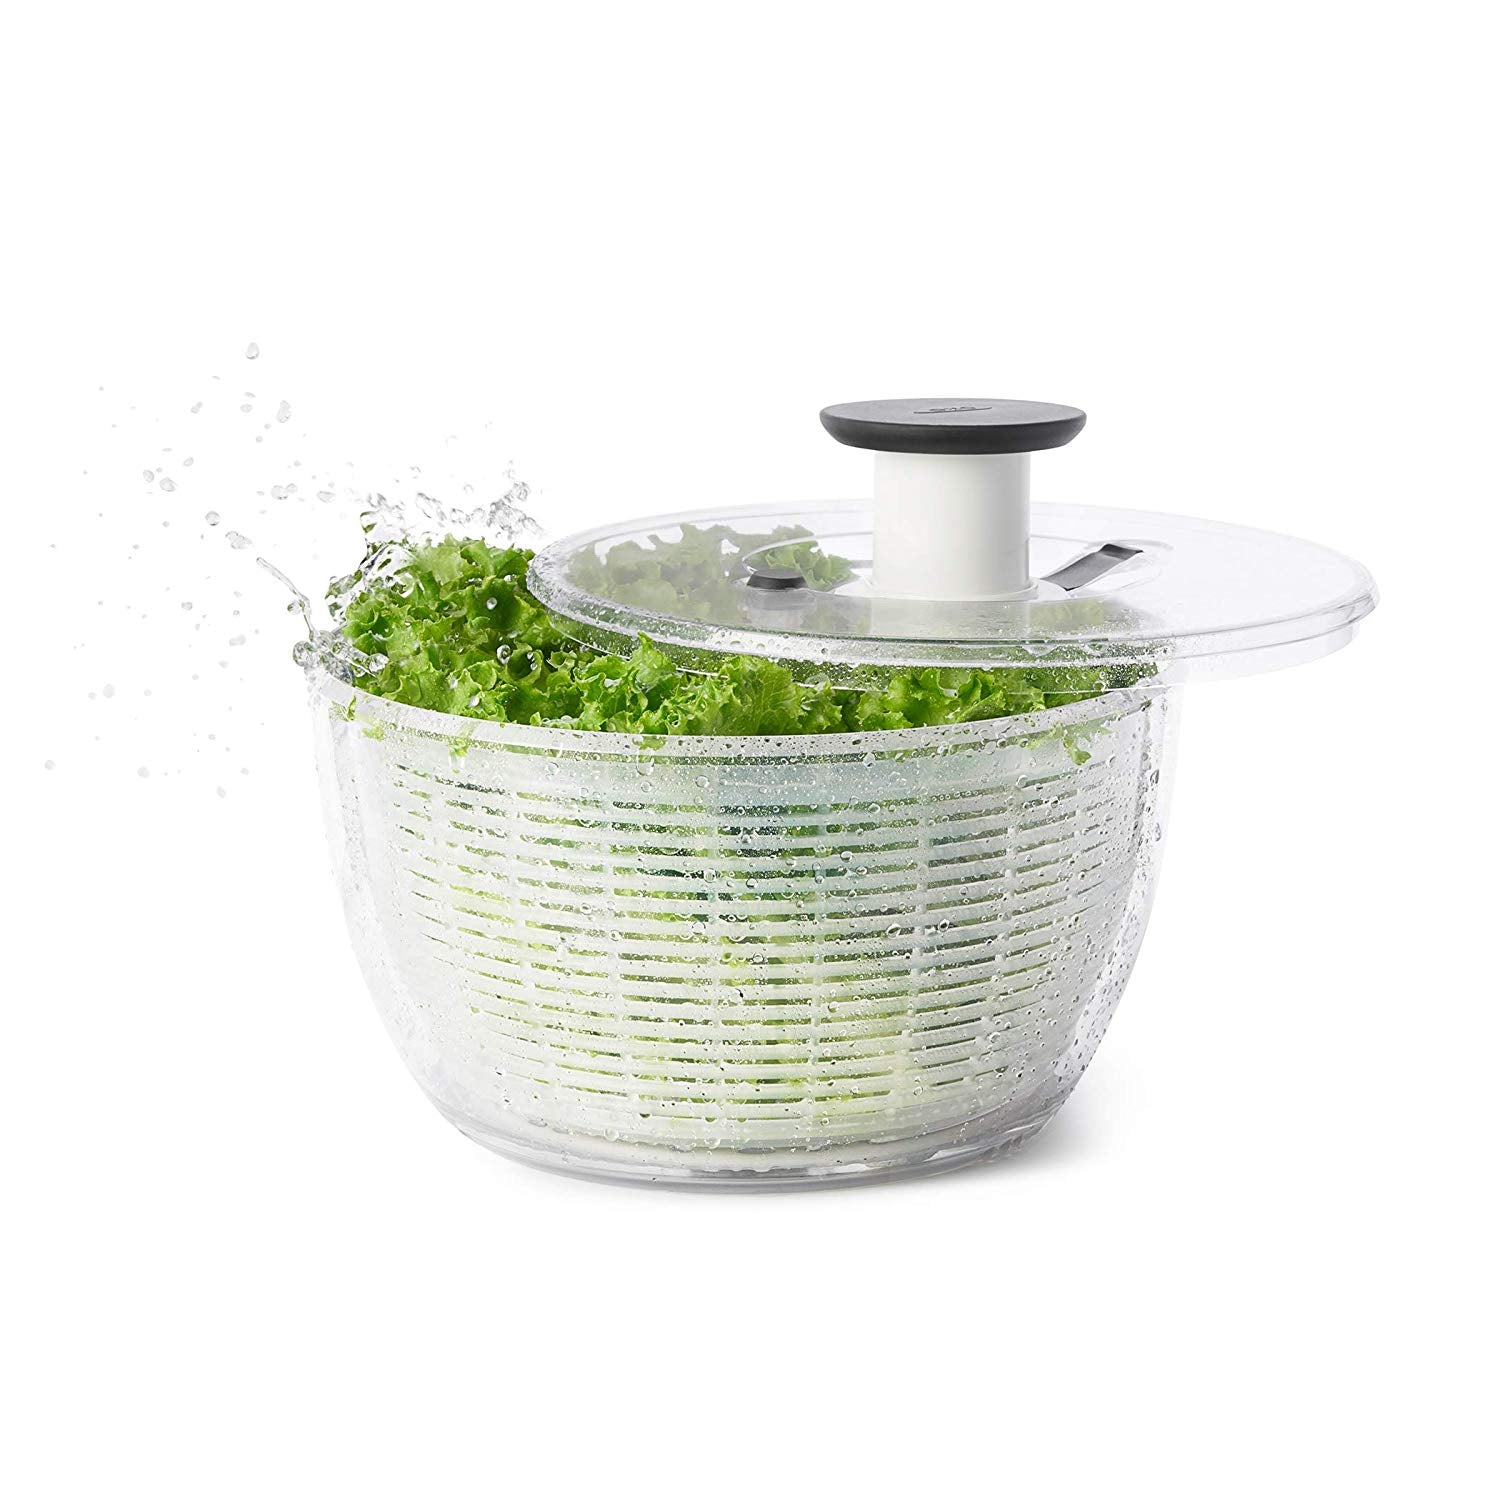 OXO 32480 Good Grips Salad Spinner, Large, Clear - The Luxury Home Store